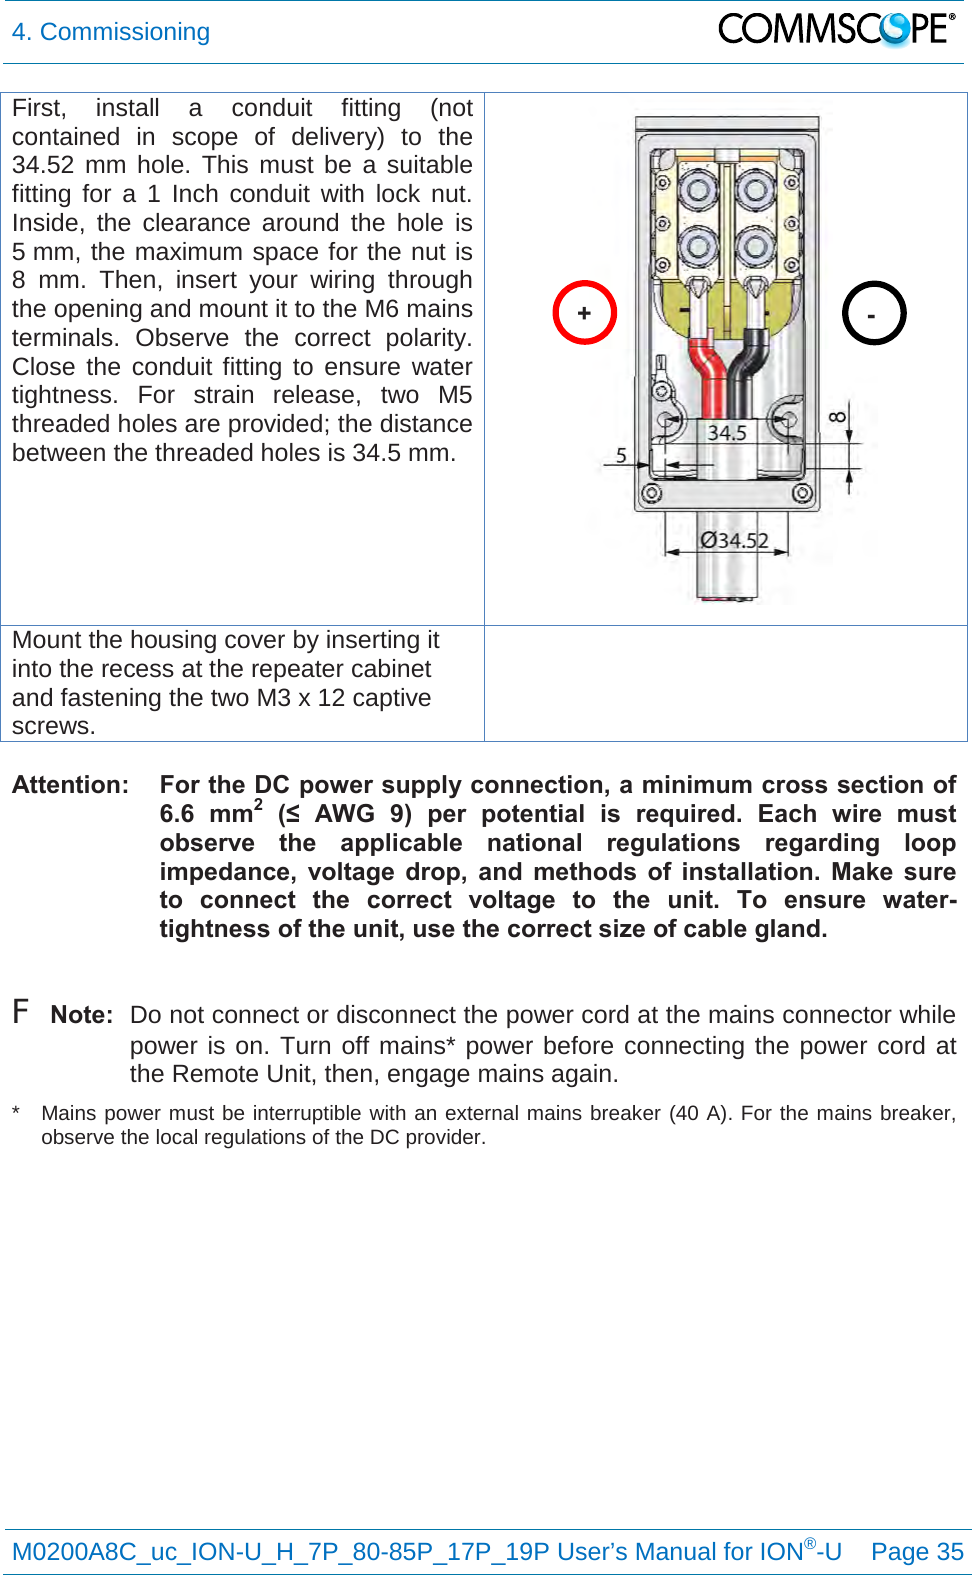 4. Commissioning   M0200A8C_uc_ION-U_H_7P_80-85P_17P_19P User’s Manual for ION®-U  Page 35  First, install a conduit fitting (not contained in scope of delivery) to the 34.52 mm hole. This must be a suitable fitting for a 1 Inch conduit with lock nut.  Inside, the clearance around the hole is 5 mm, the maximum space for the nut is 8 mm. Then, insert your wiring through the opening and mount it to the M6 mains terminals. Observe the correct polarity. Close the conduit fitting to ensure water tightness. For strain release, two M5 threaded holes are provided; the distance between the threaded holes is 34.5 mm.  Mount the housing cover by inserting it into the recess at the repeater cabinet and fastening the two M3 x 12 captive screws.   Attention:  For the DC power supply connection, a minimum cross section of 6.6 mm2 (≤  AWG  9)  per  potential  is required. Each wire must observe the applicable national regulations regarding loop impedance, voltage drop, and methods of installation. Make sure to connect the correct voltage to the unit. To ensure water-tightness of the unit, use the correct size of cable gland.  F Note:  Do not connect or disconnect the power cord at the mains connector while power is on. Turn off mains* power before connecting the power cord at the Remote Unit, then, engage mains again. *  Mains power must be interruptible with an external mains breaker (40 A). For the mains breaker, observe the local regulations of the DC provider.    + - 